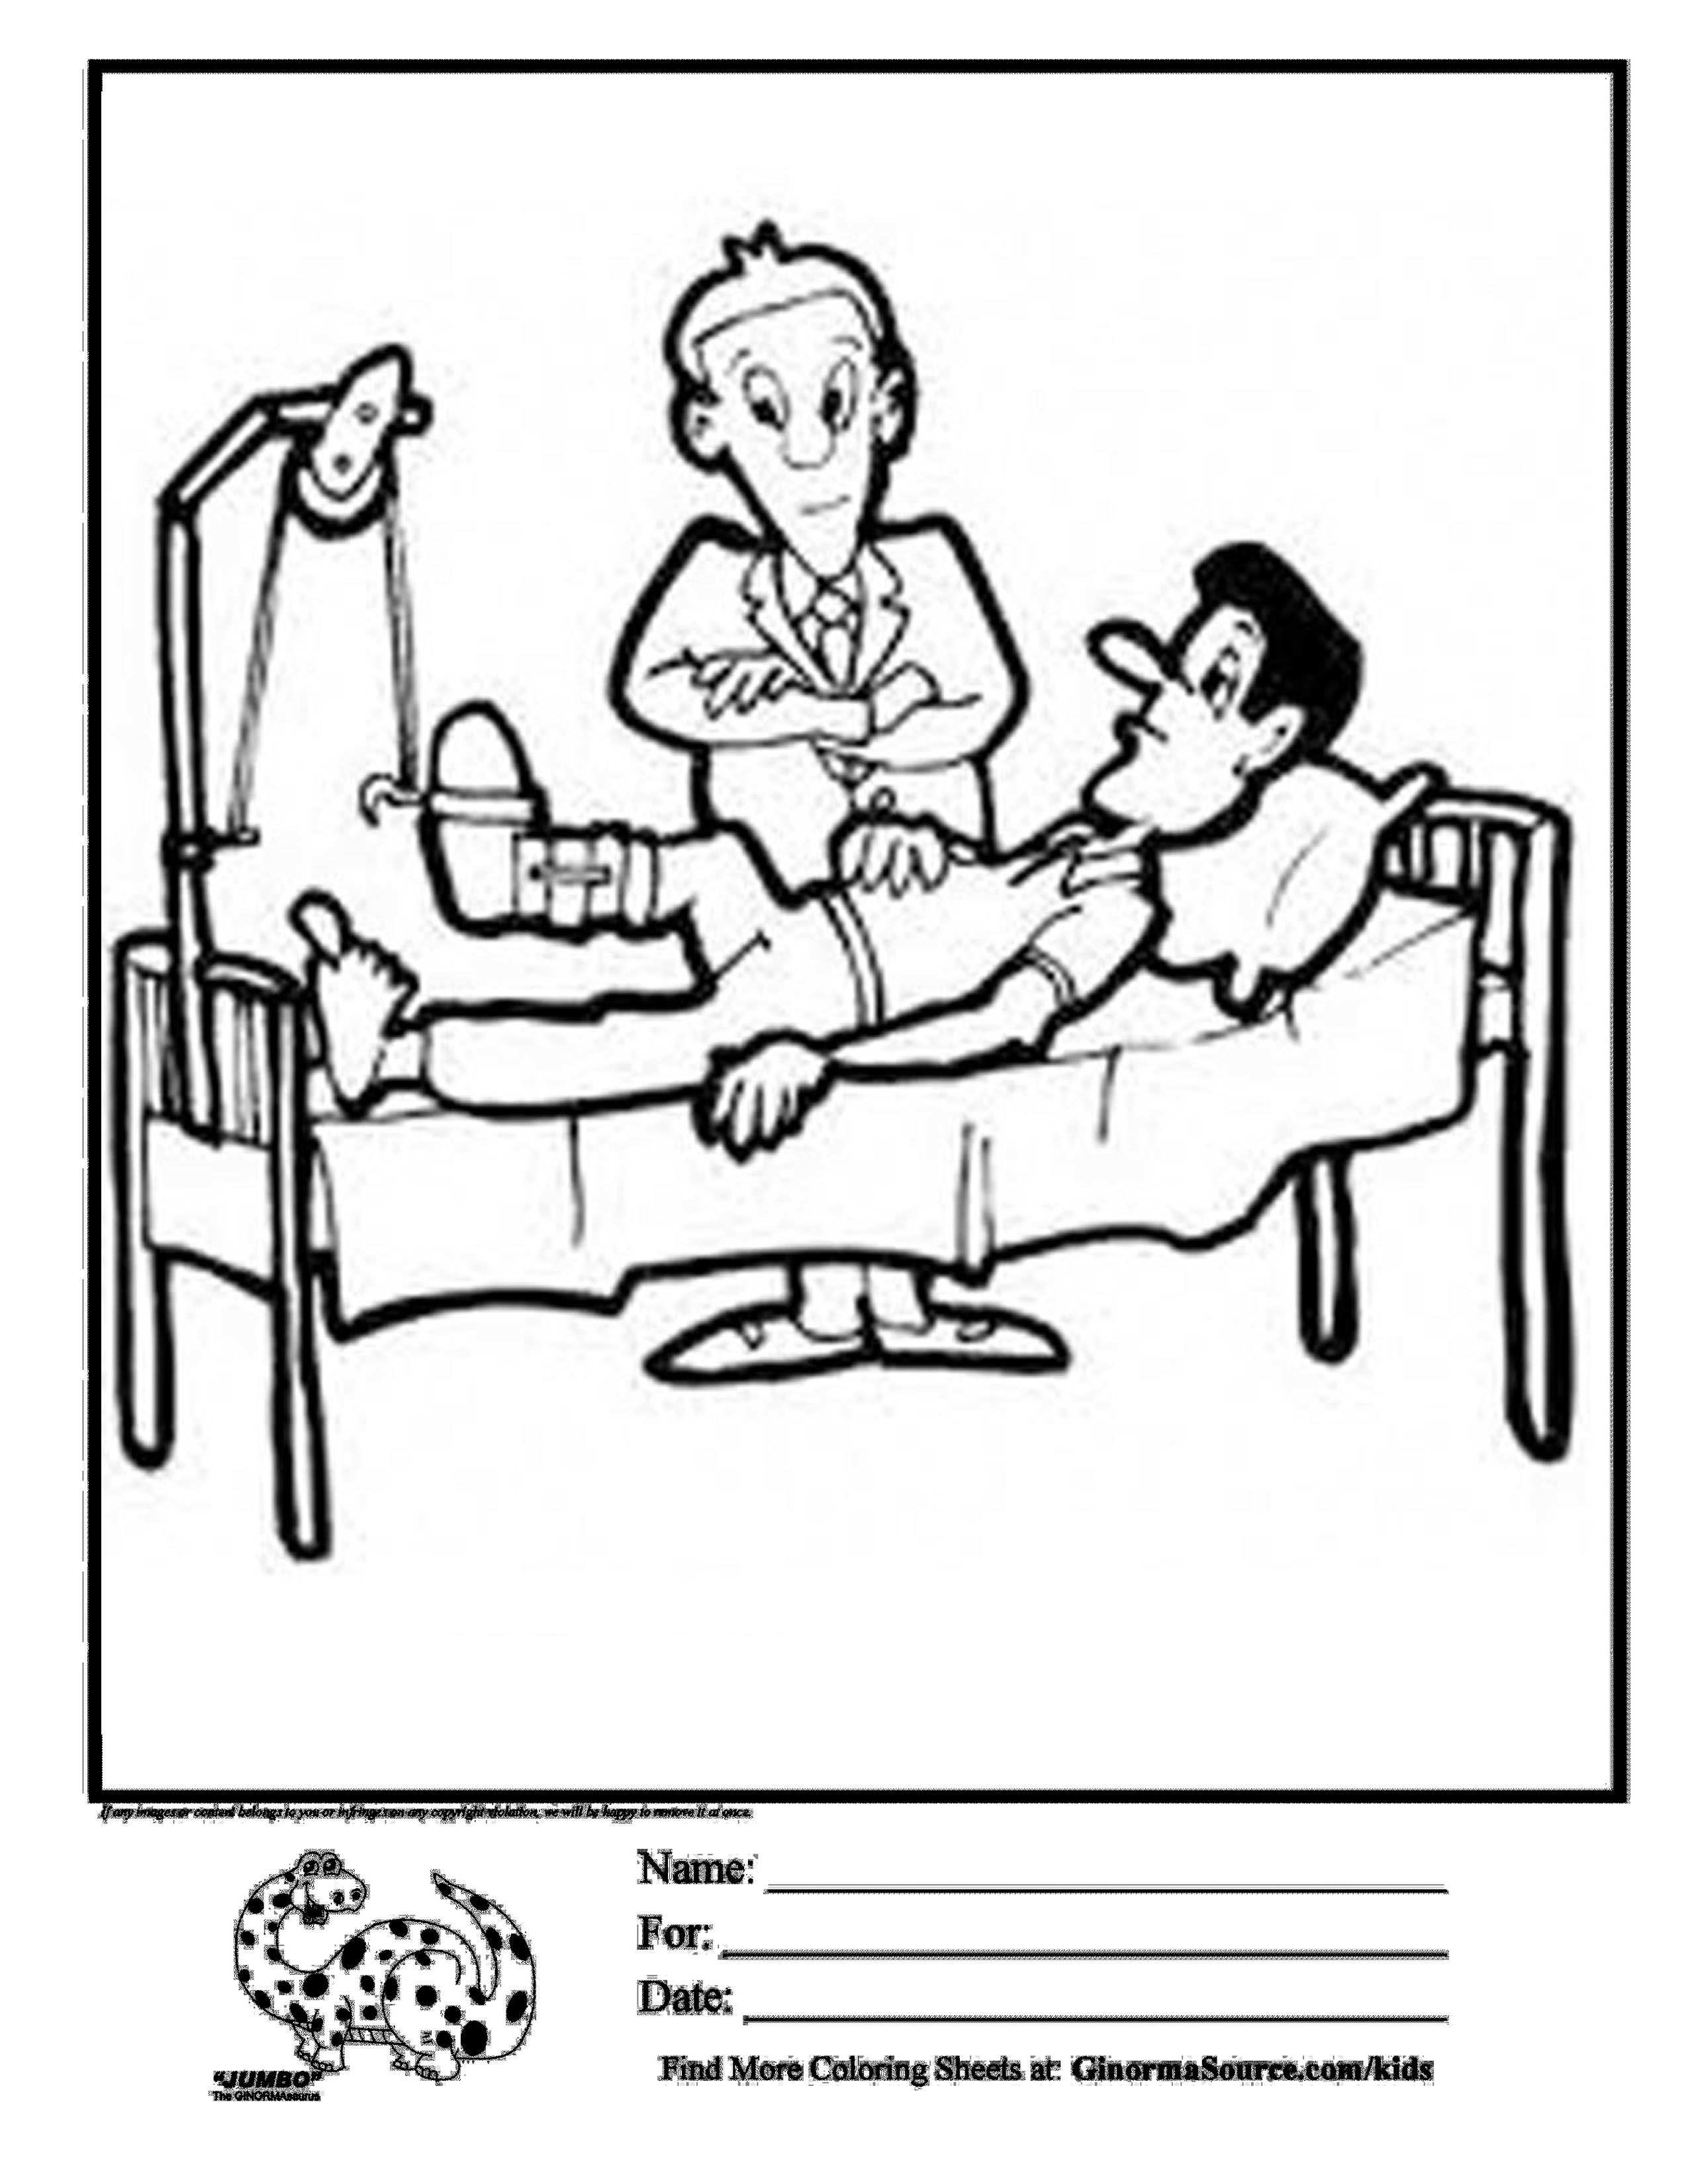 Coloring Page Hospital Bed With Images Coloring Pages Color